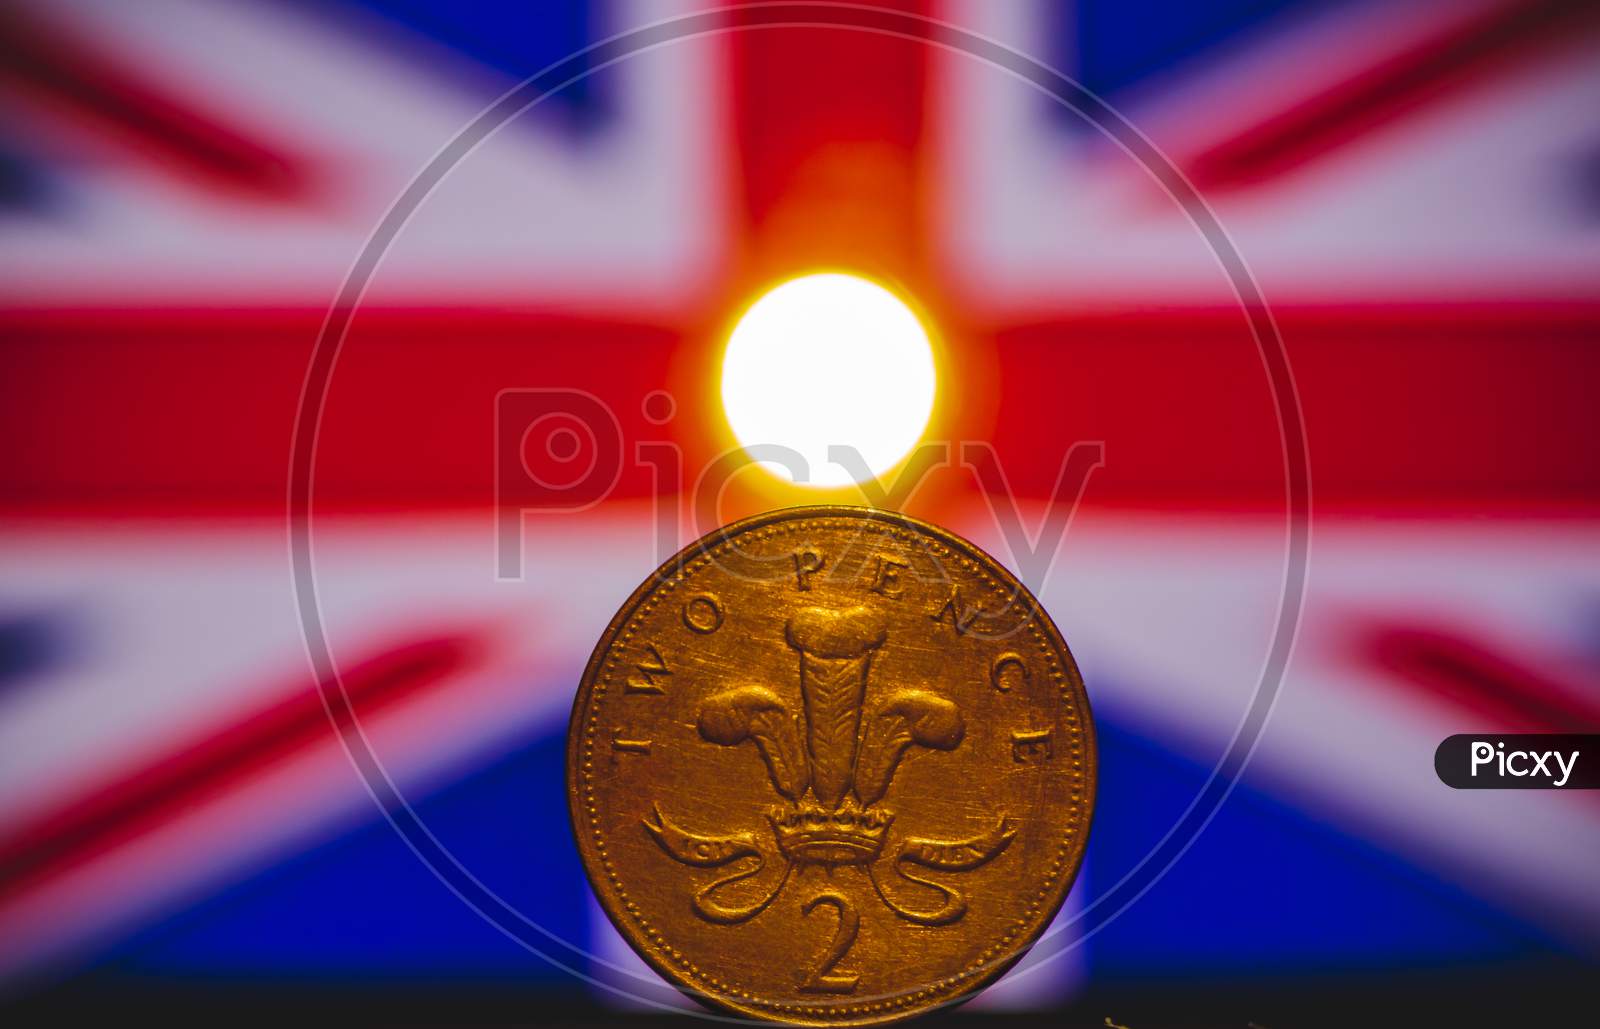 British Coin 2 Pence (2001) Isolated On (Uk) United Kingdom Flag Background And Lighting With Space For Copy Text. Front Side Of Two Pence Coin. England Coins Collectors World Wide.